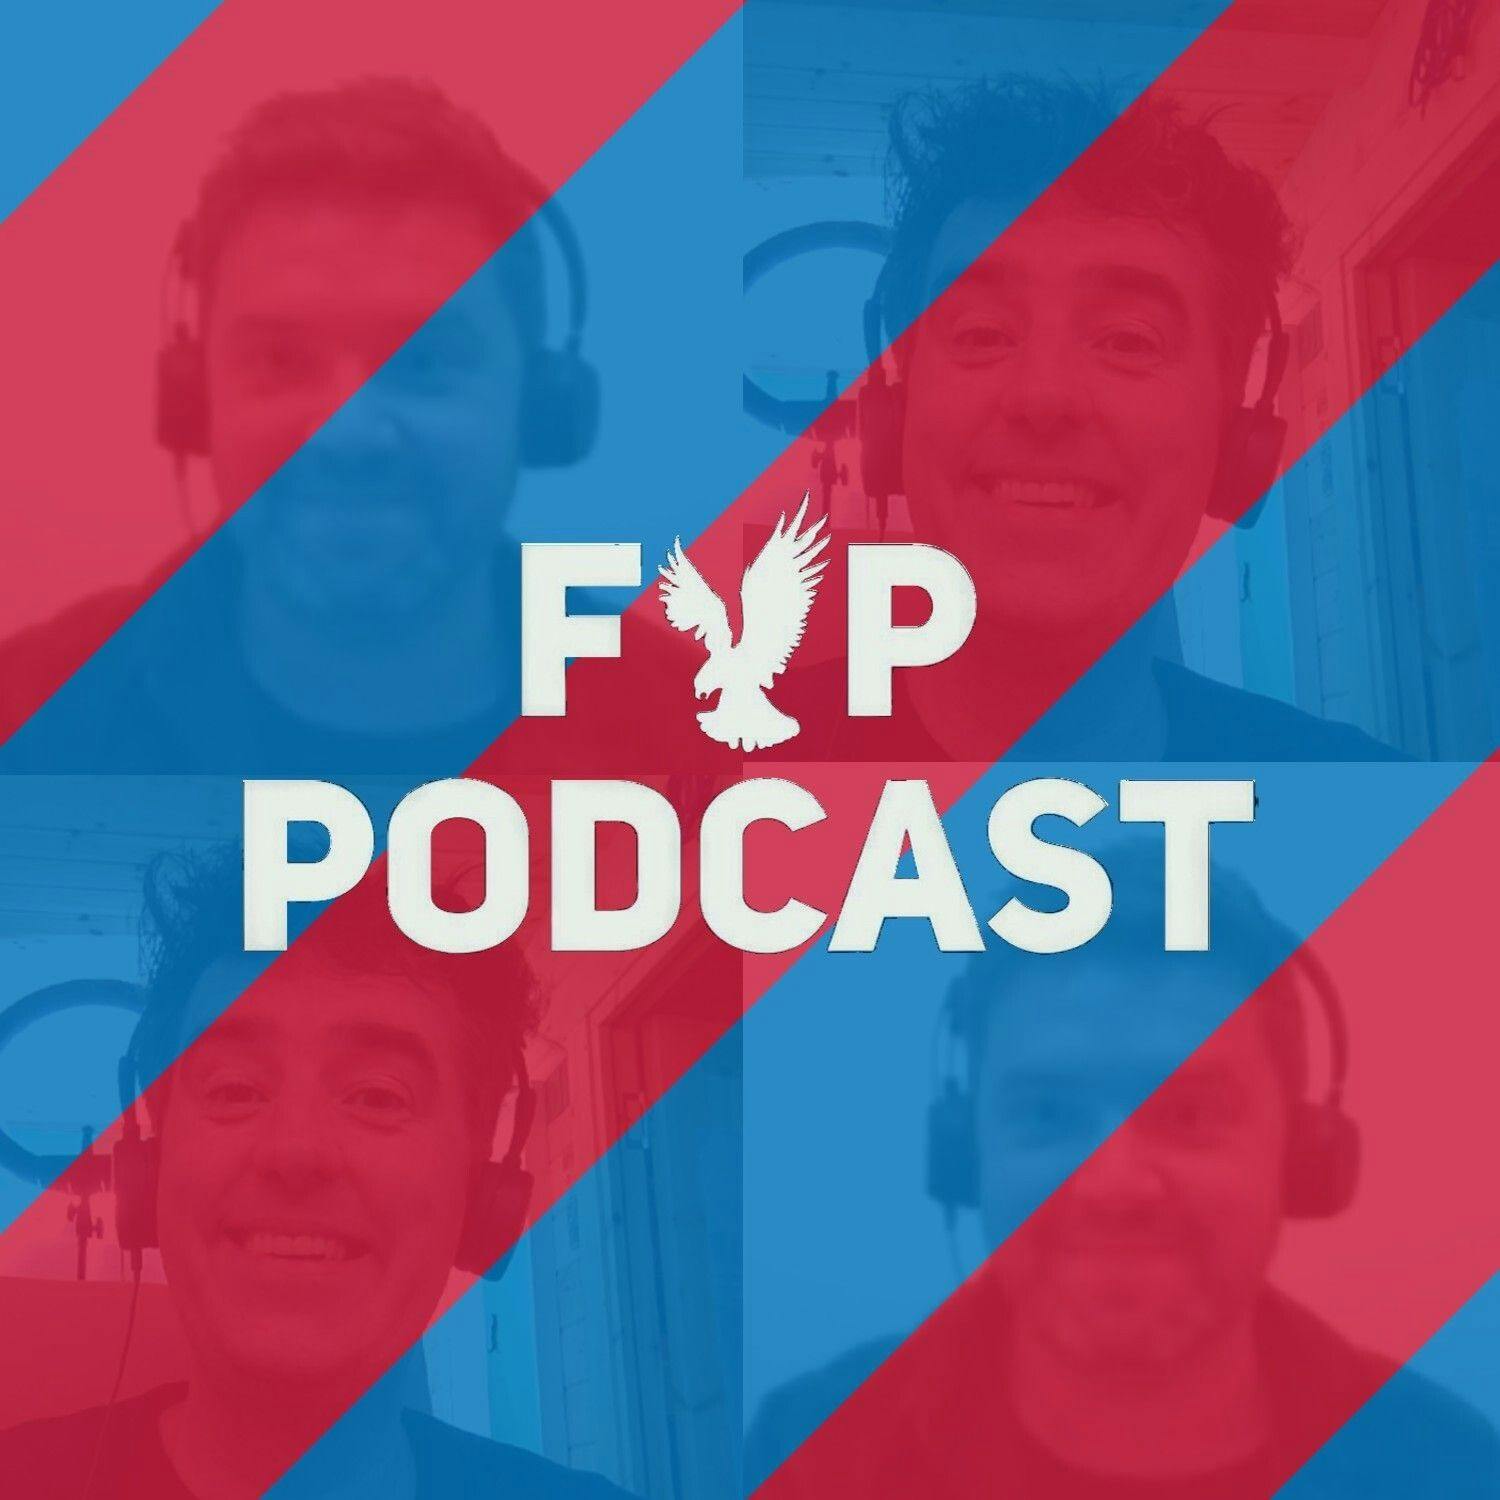 FYP Podcast 471 | Pints At 11.30am